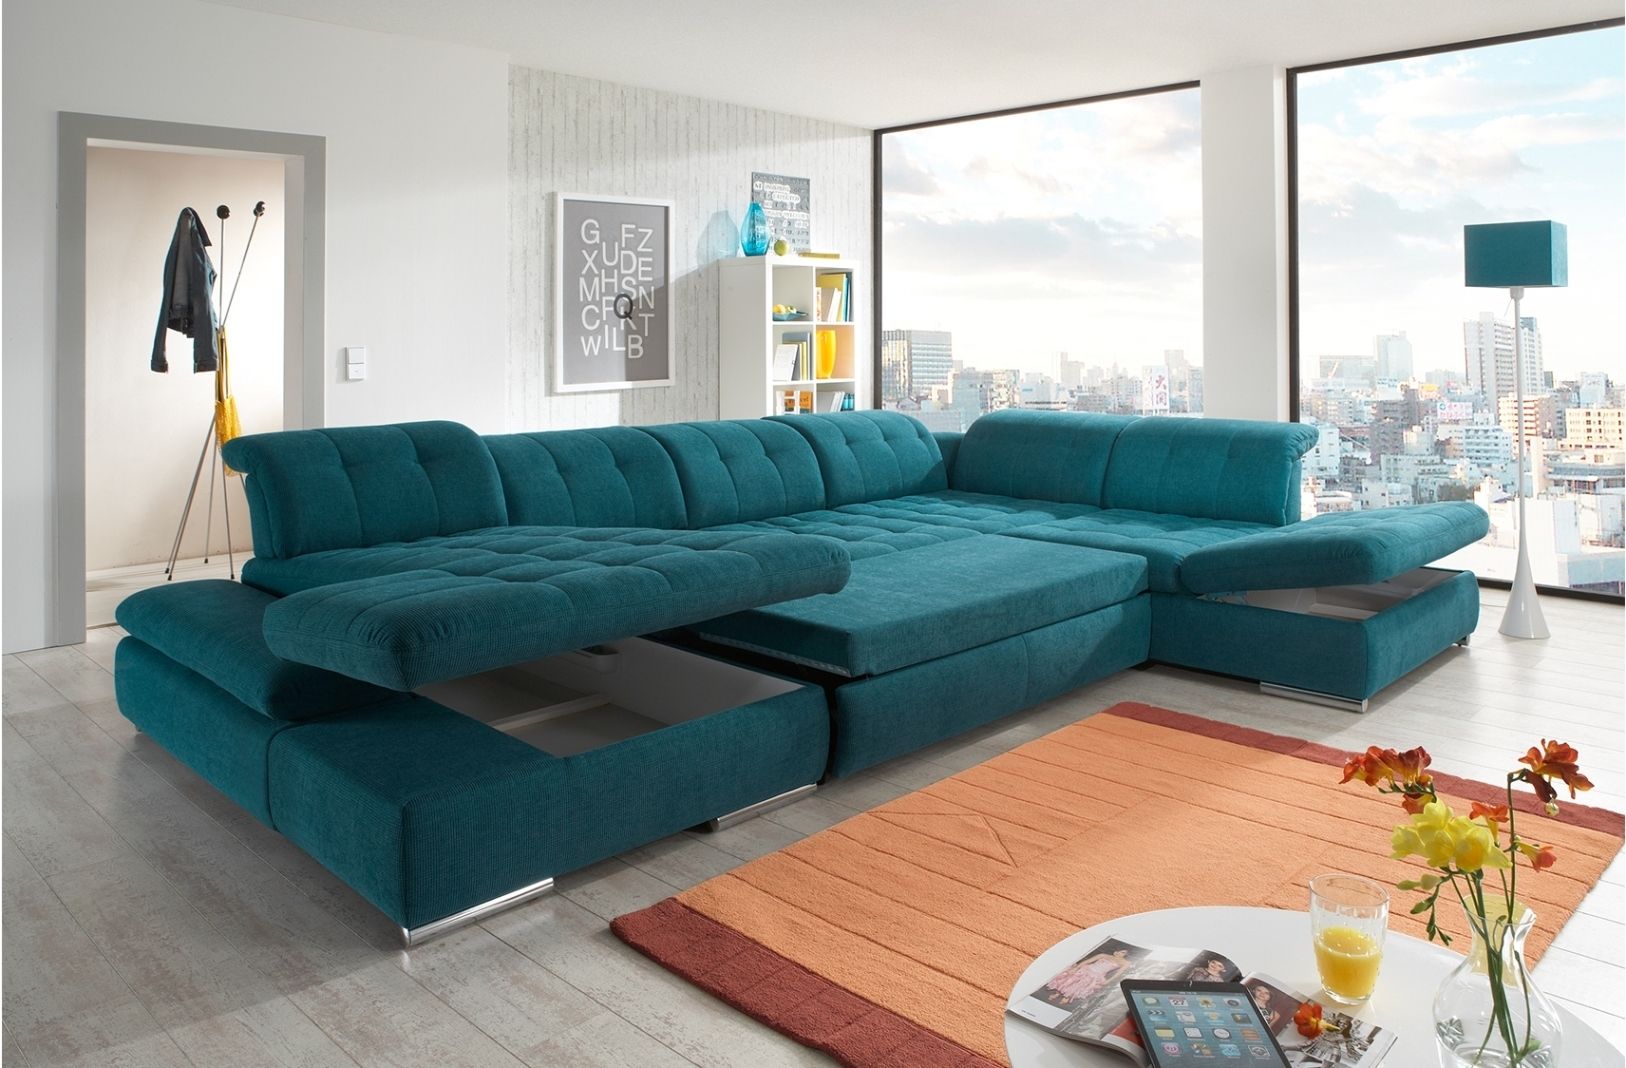 Elegant Teal Sectional Sofa 20 Sofa Table Ideas With Teal Sectional Sofa In Guelph Sectional Sofas (View 7 of 10)